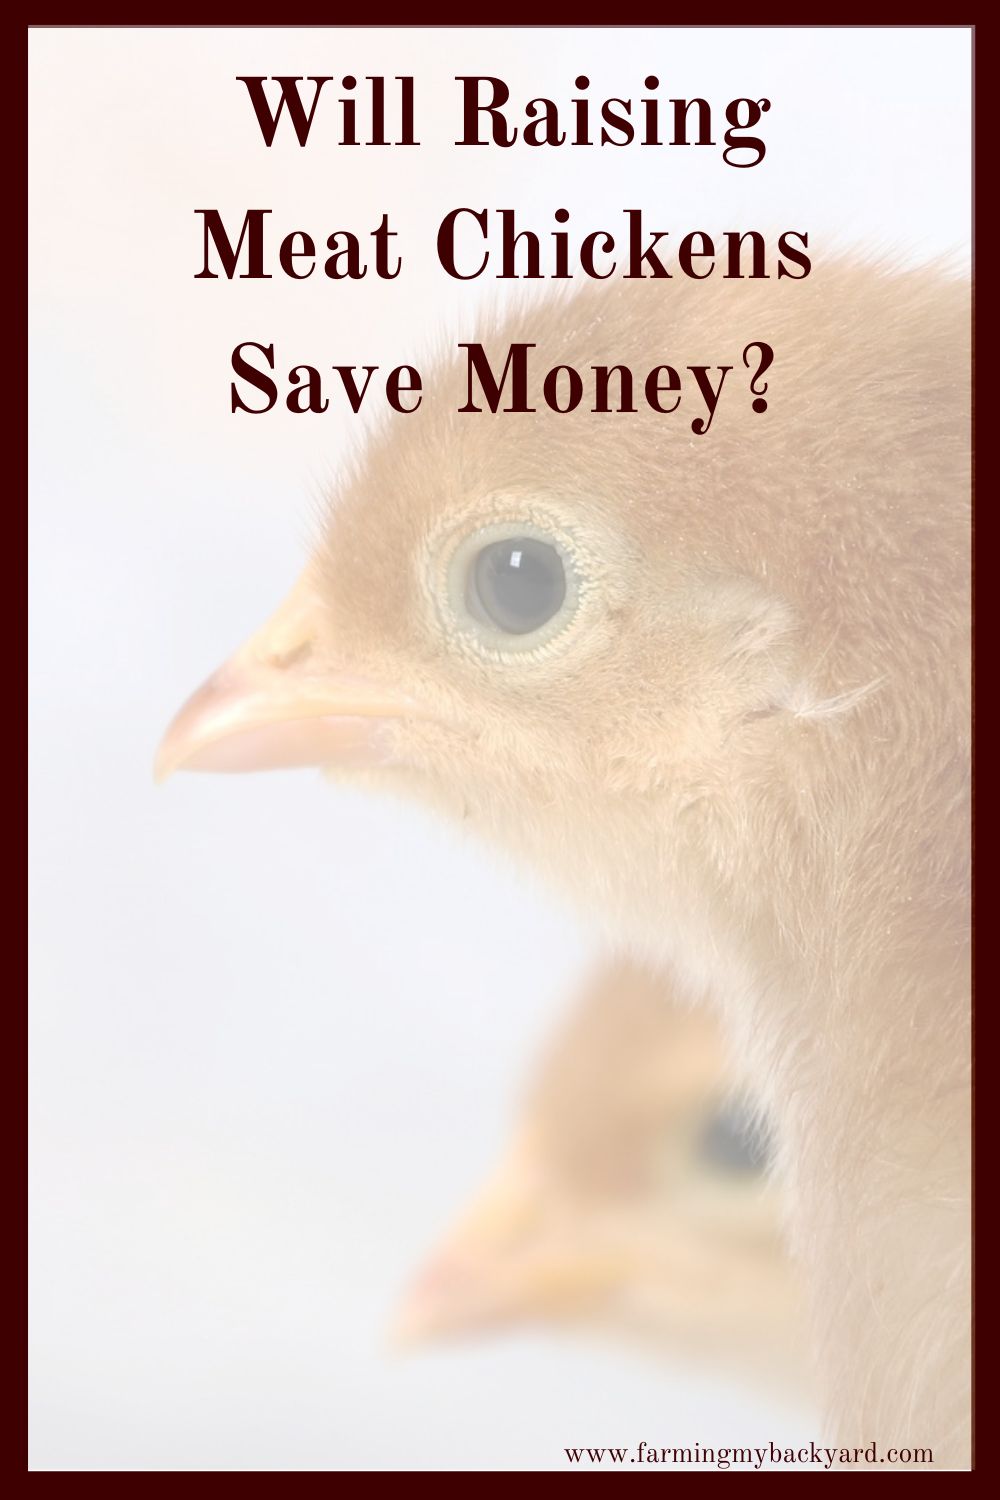 Doing it yourself is always cheaper, right?  Right? So, will raising meat chickens save money? Continue reading to find out!